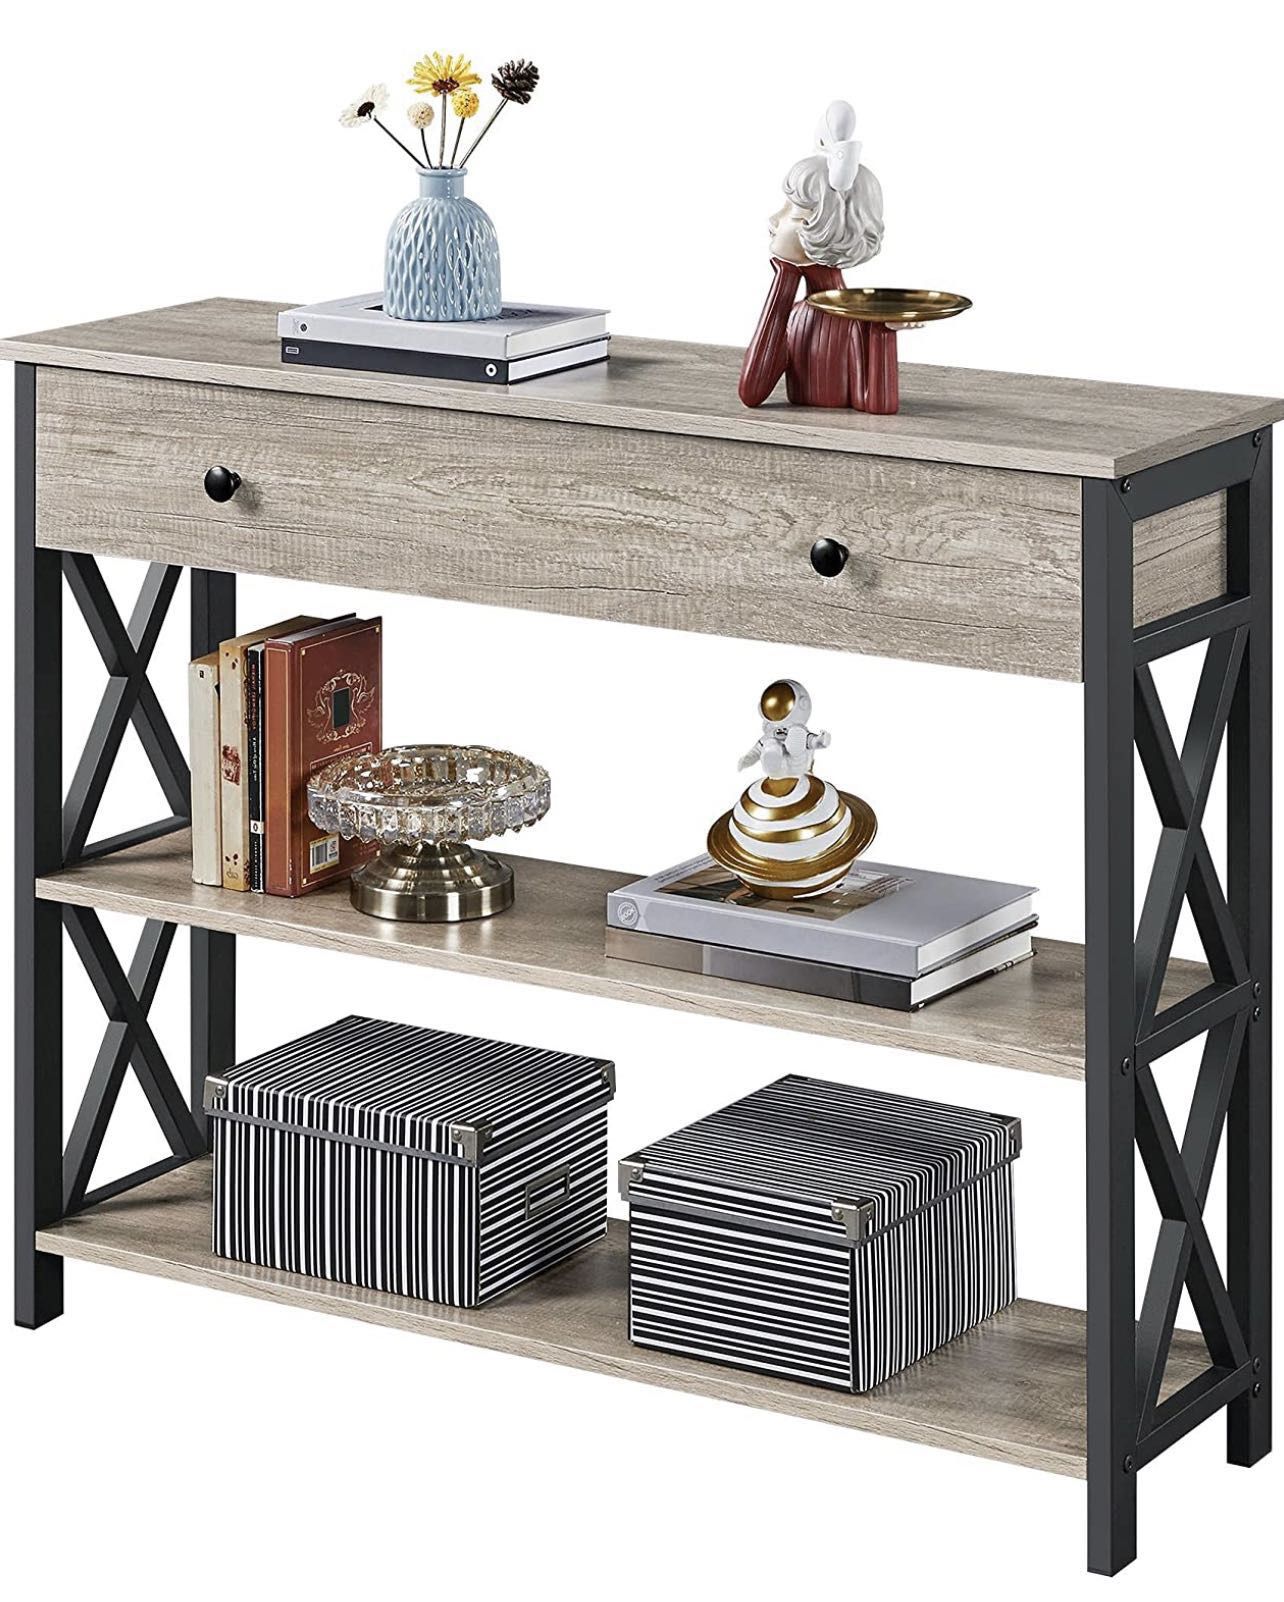  Console Table with Drawer for Entryway, Narrow Entry Table for Living Room with Drawer & Open Storage, Industrial Wood Hallway Sofa Table with Stable